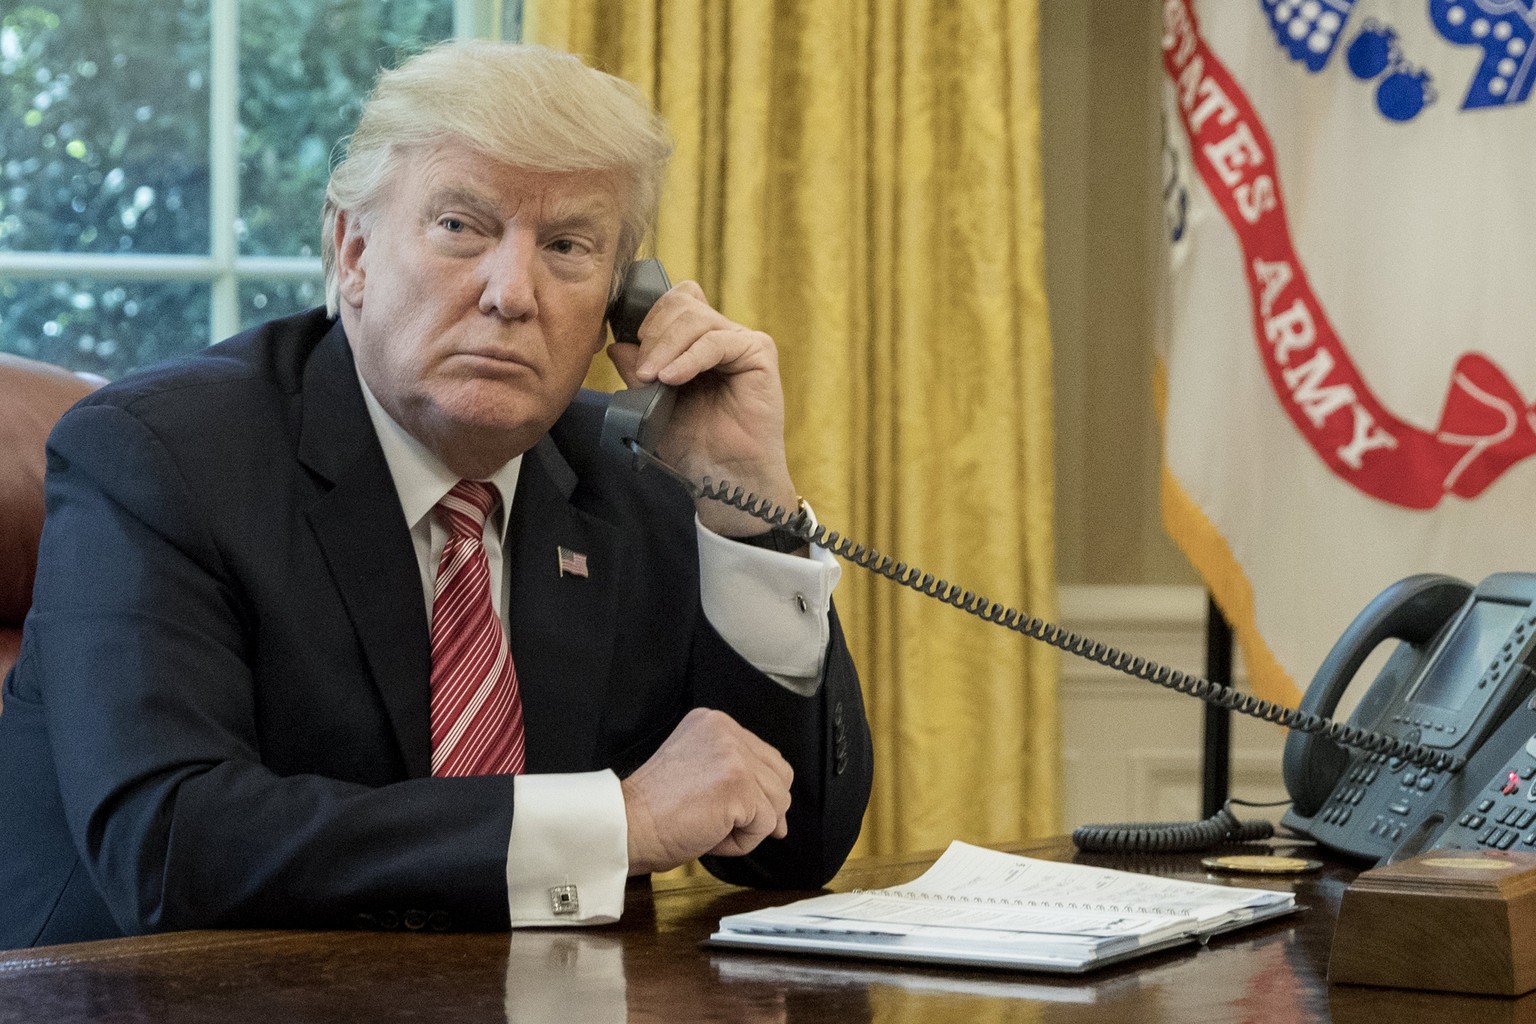 epa06052937 US President Donald J. Trump makes a phone call to Prime Minister of Ireland to Leo Varadkar in the Oval Office of the White House in Washington, DC, USA, 27 June 2017. EPA/MICHAEL REYNOLD ...